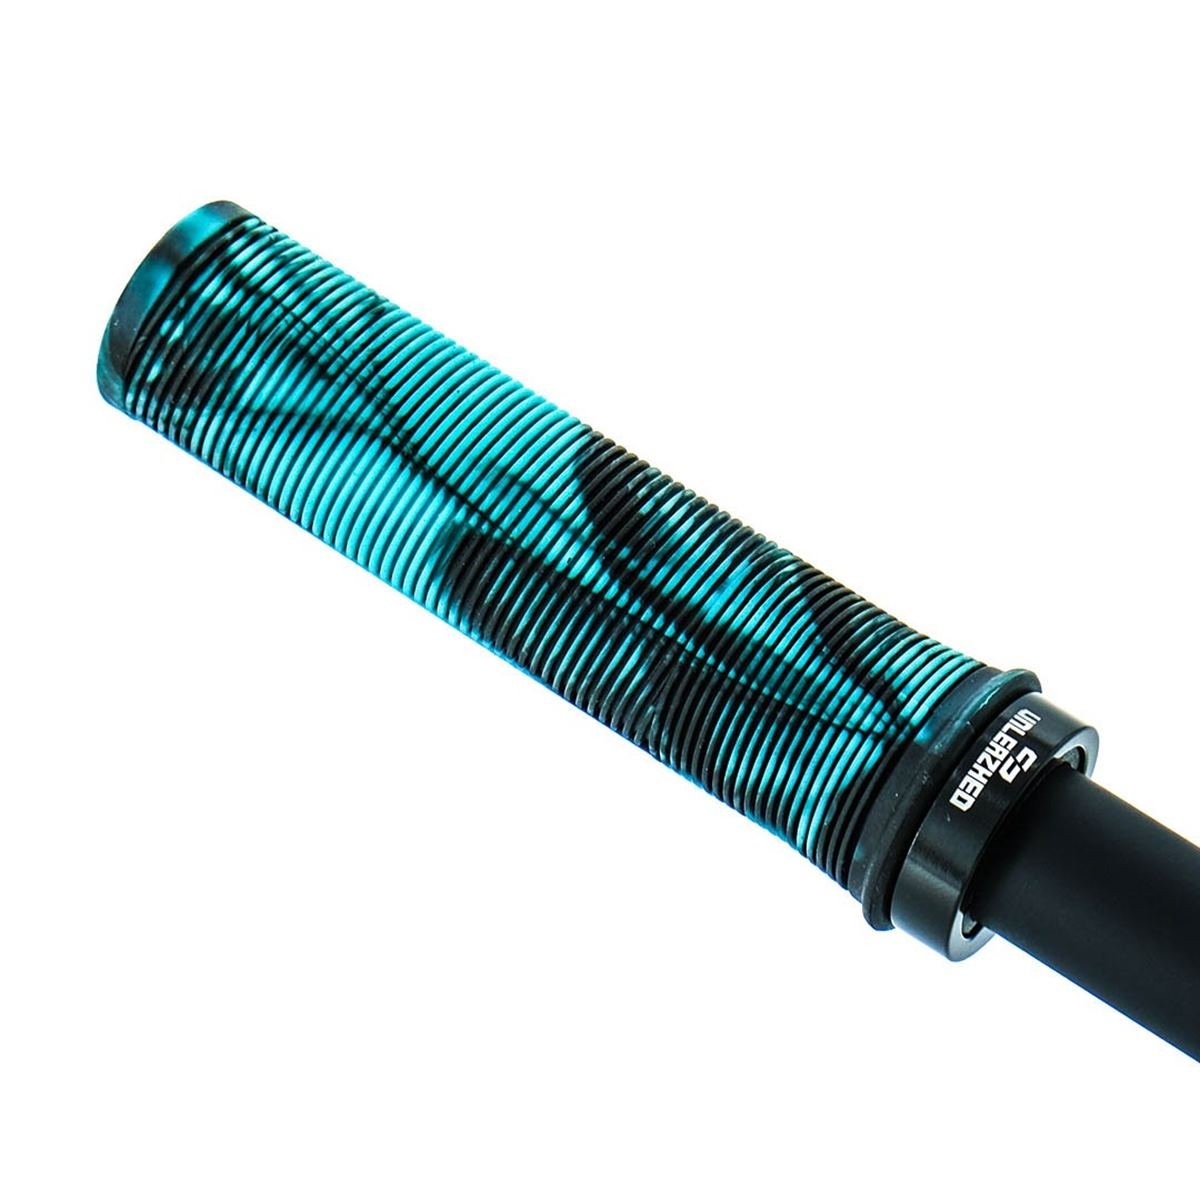 Unleazhed MTB Grips G1 Turquoise/Black, 135 x 31 mm